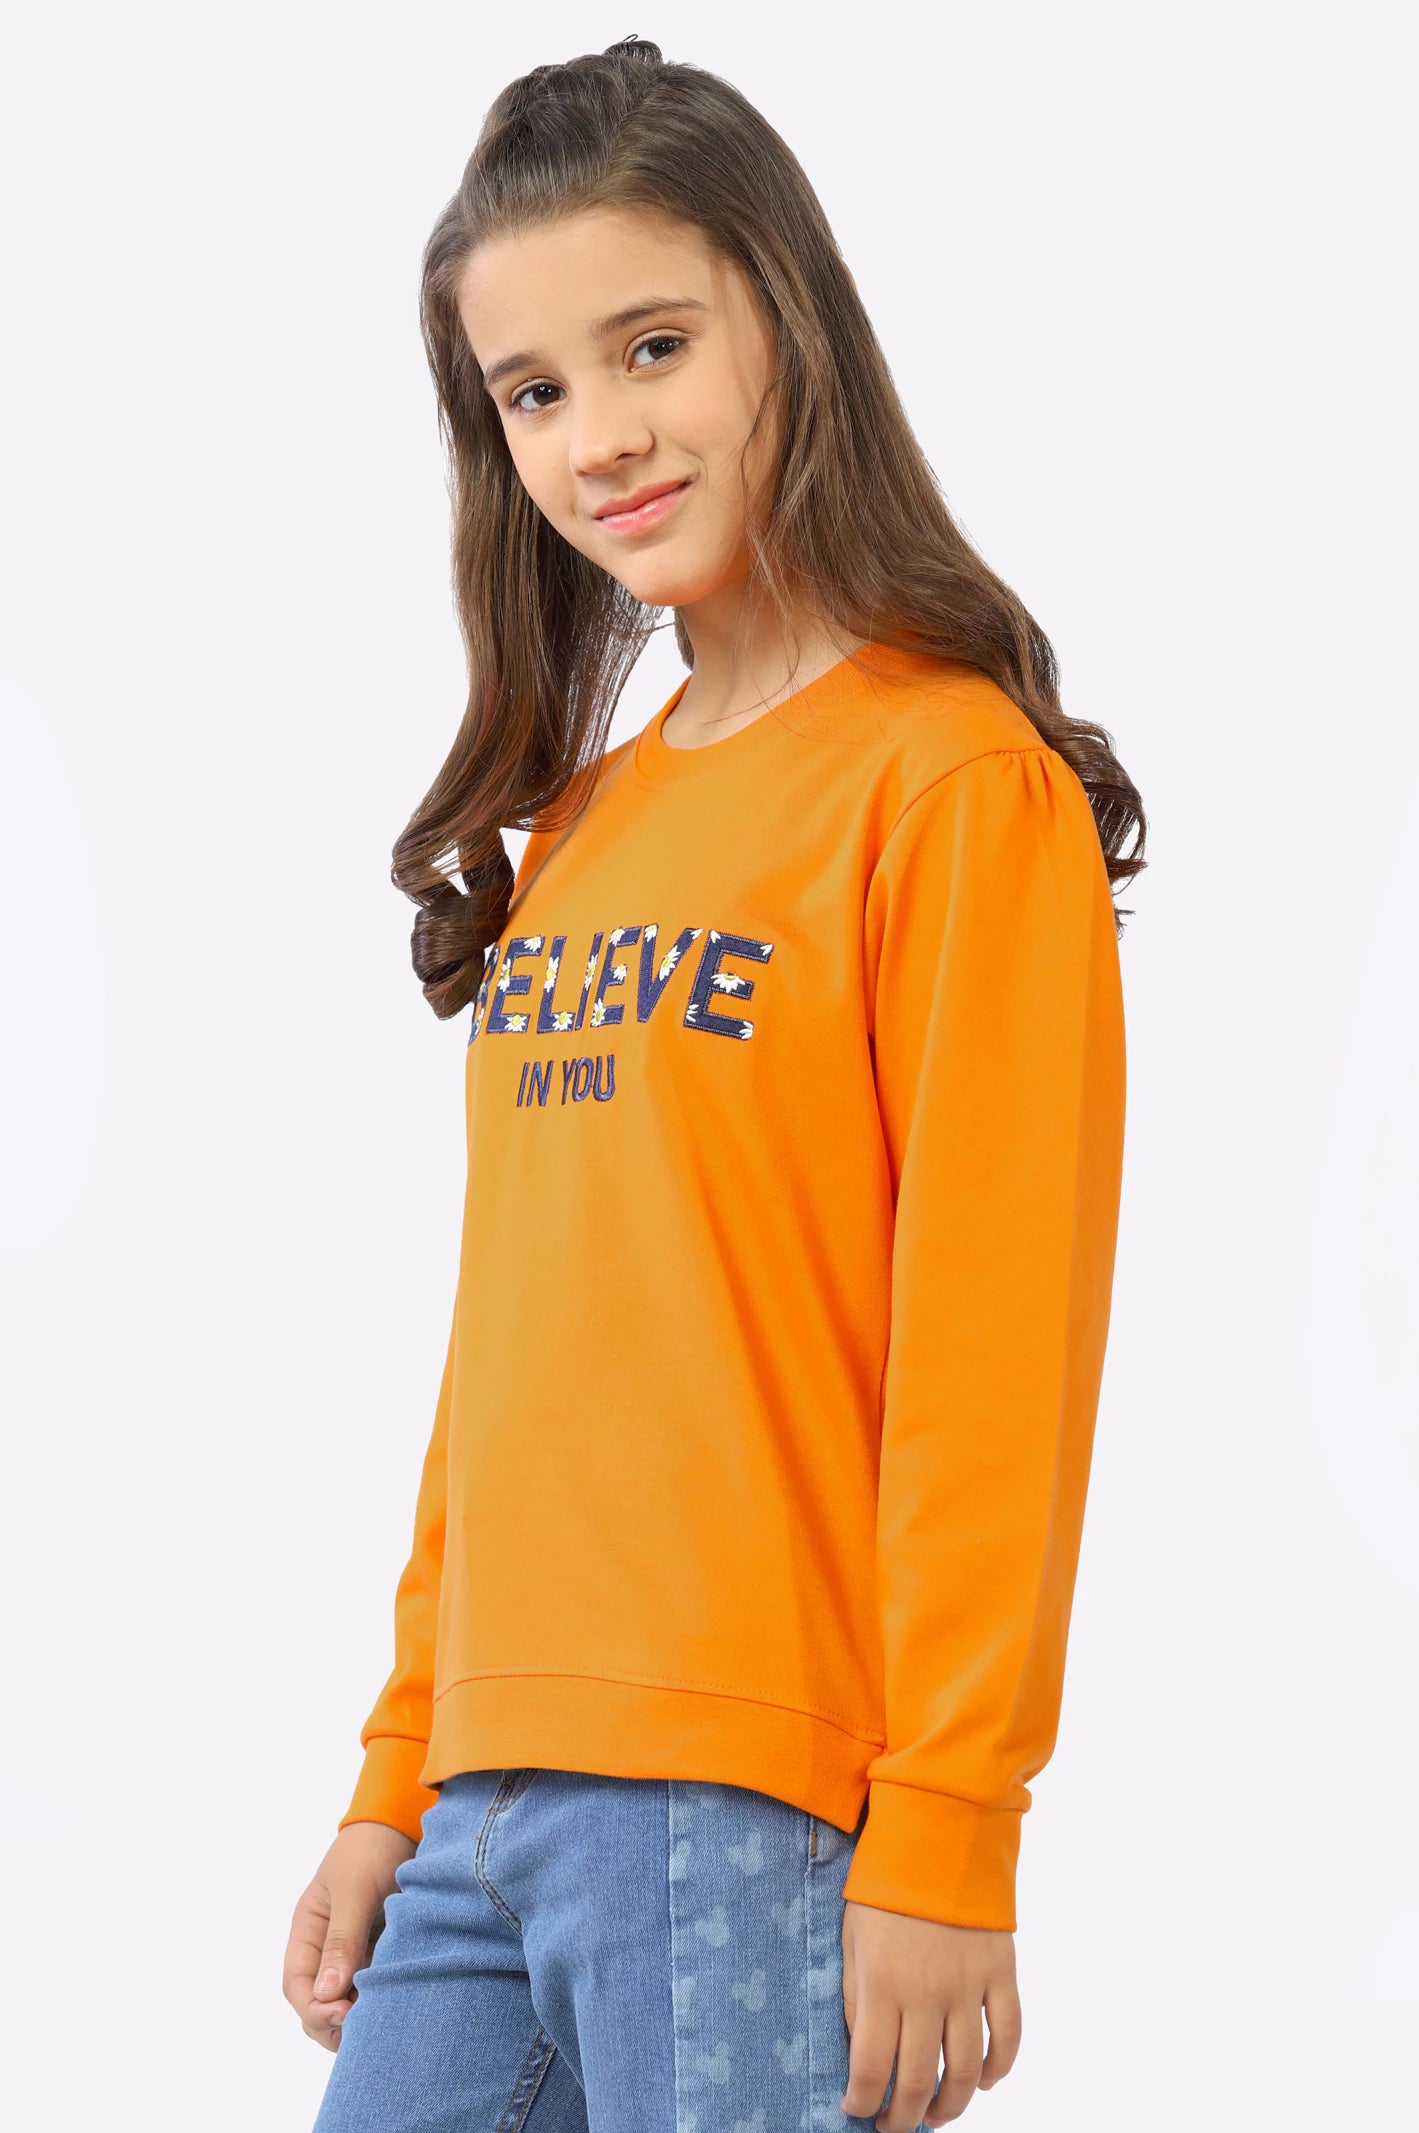 Orange Embroidered Girls Sweatshirt From Diners